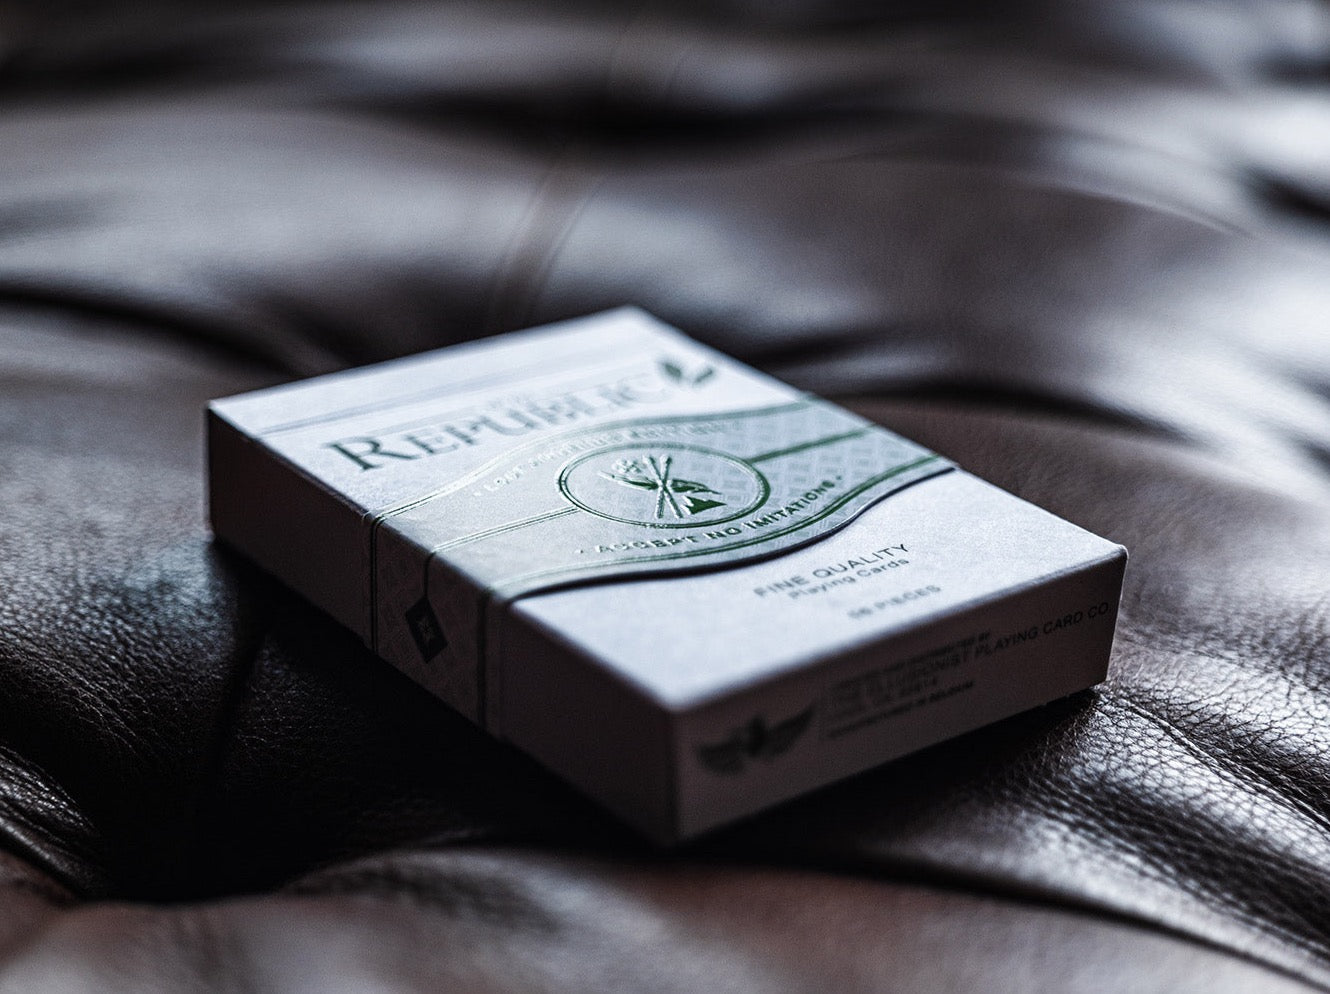 Republics: Jeremy Griffith Edition by Luxury-pressed E7 | Ellusionist